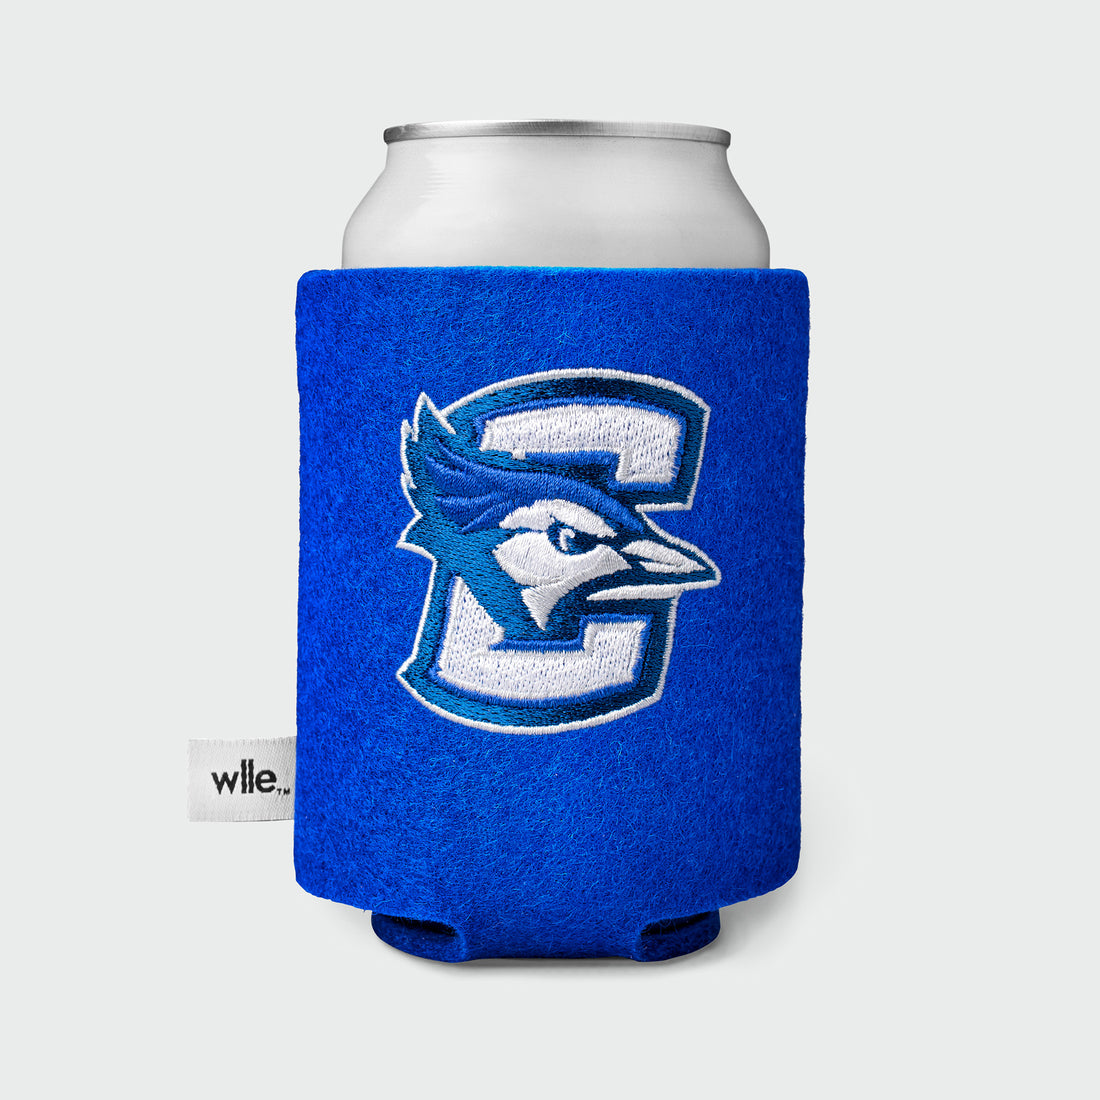 Creighton University Bluejay Electric Blue wlle™ Drink Sweater